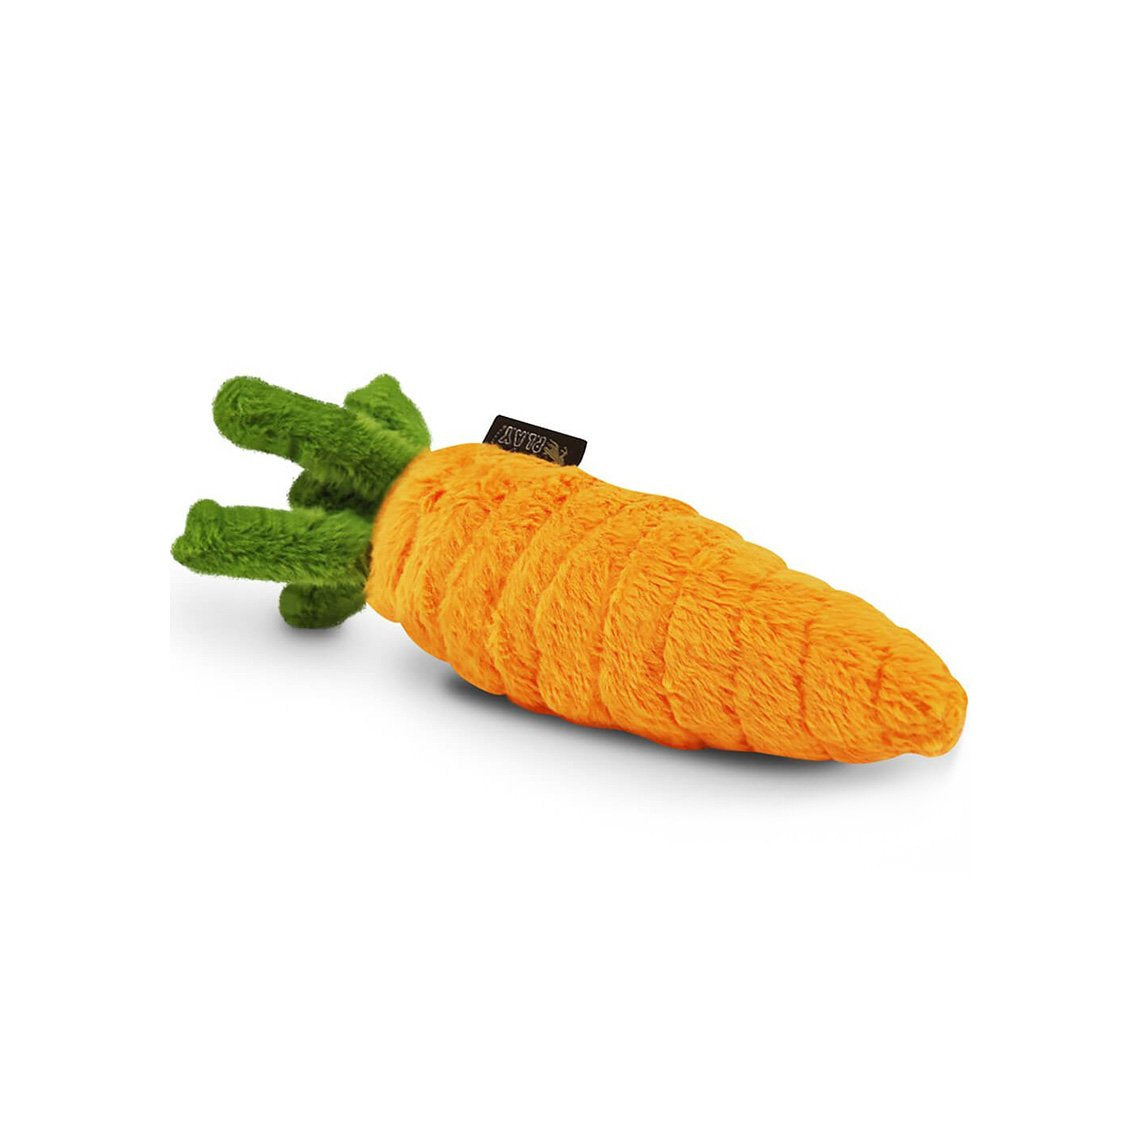 P.L.A.Y. Garden Fresh Collection Plush Eco-Friendly Dog Toys -  P.L.A.Y. Pet Lifestyle and You, MPN_638026